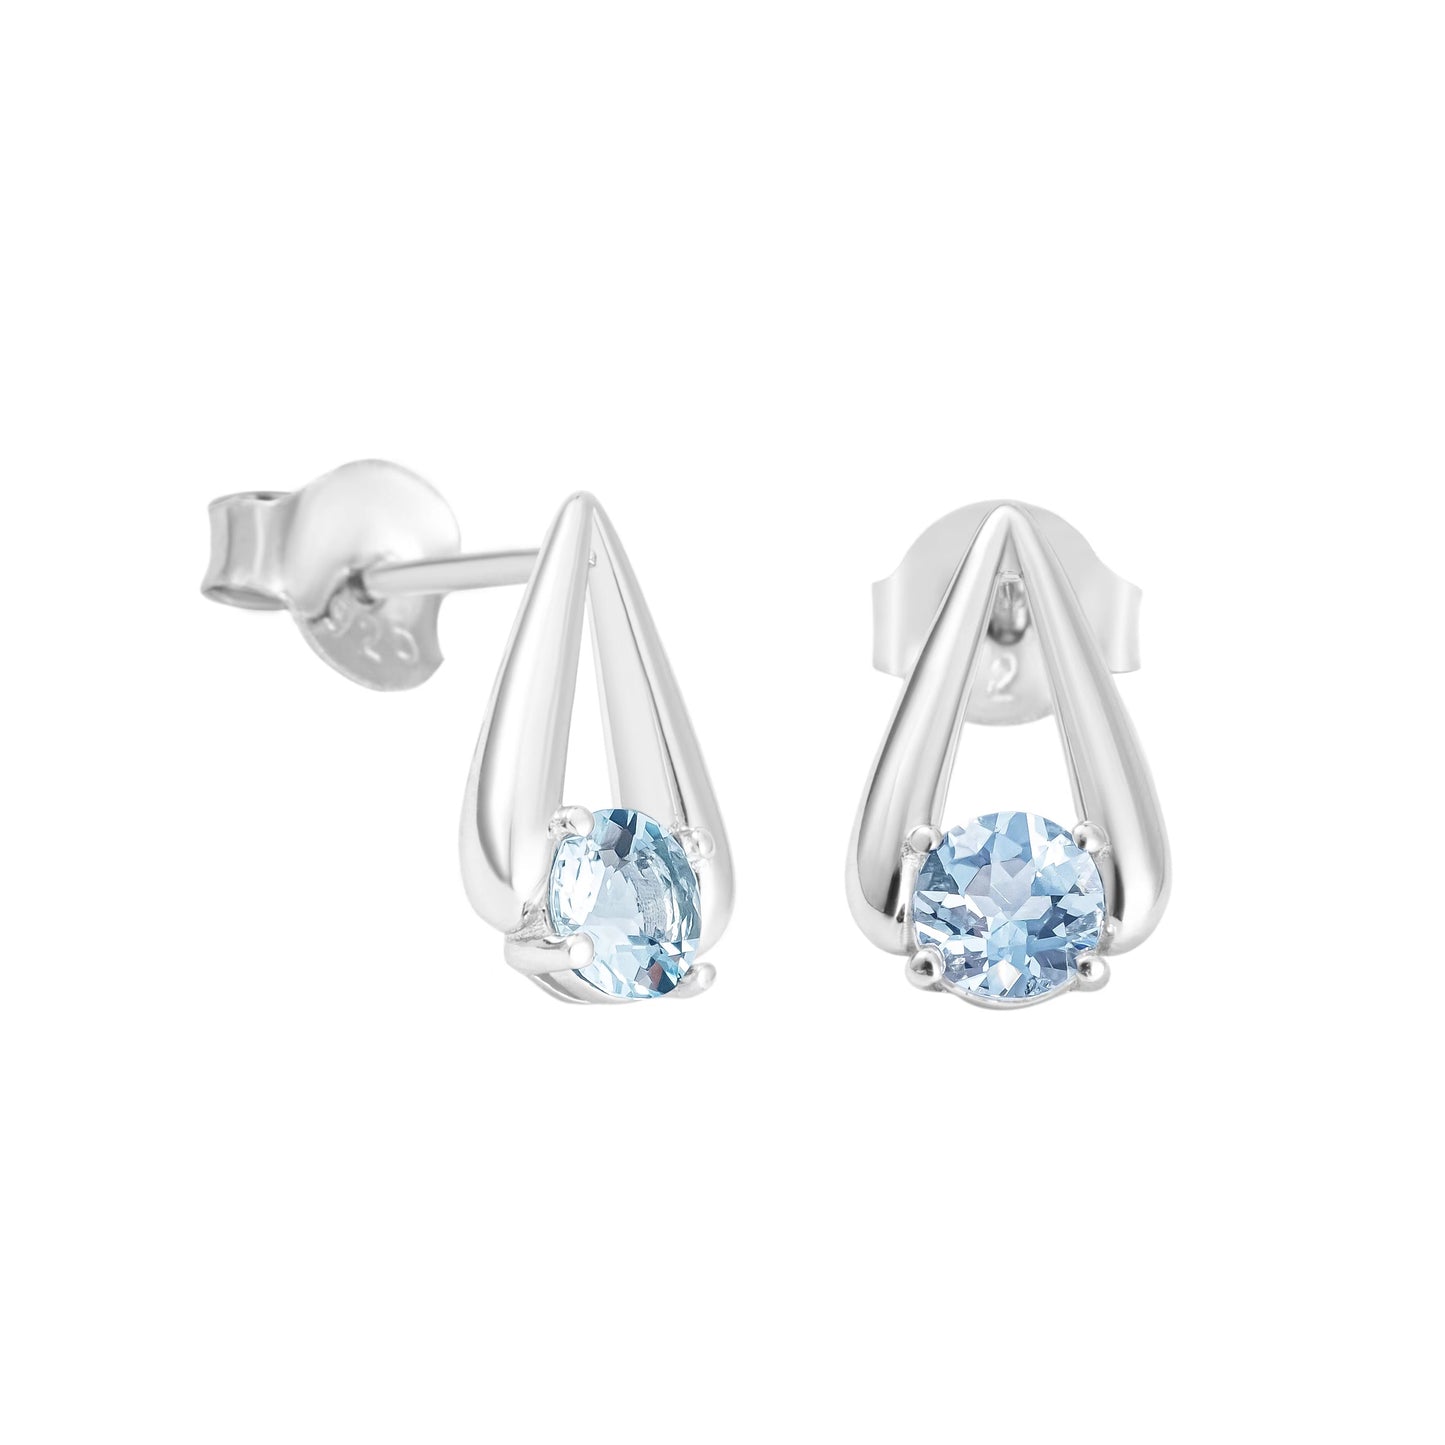 Round Aquamarine Earrings in Sterling Silver